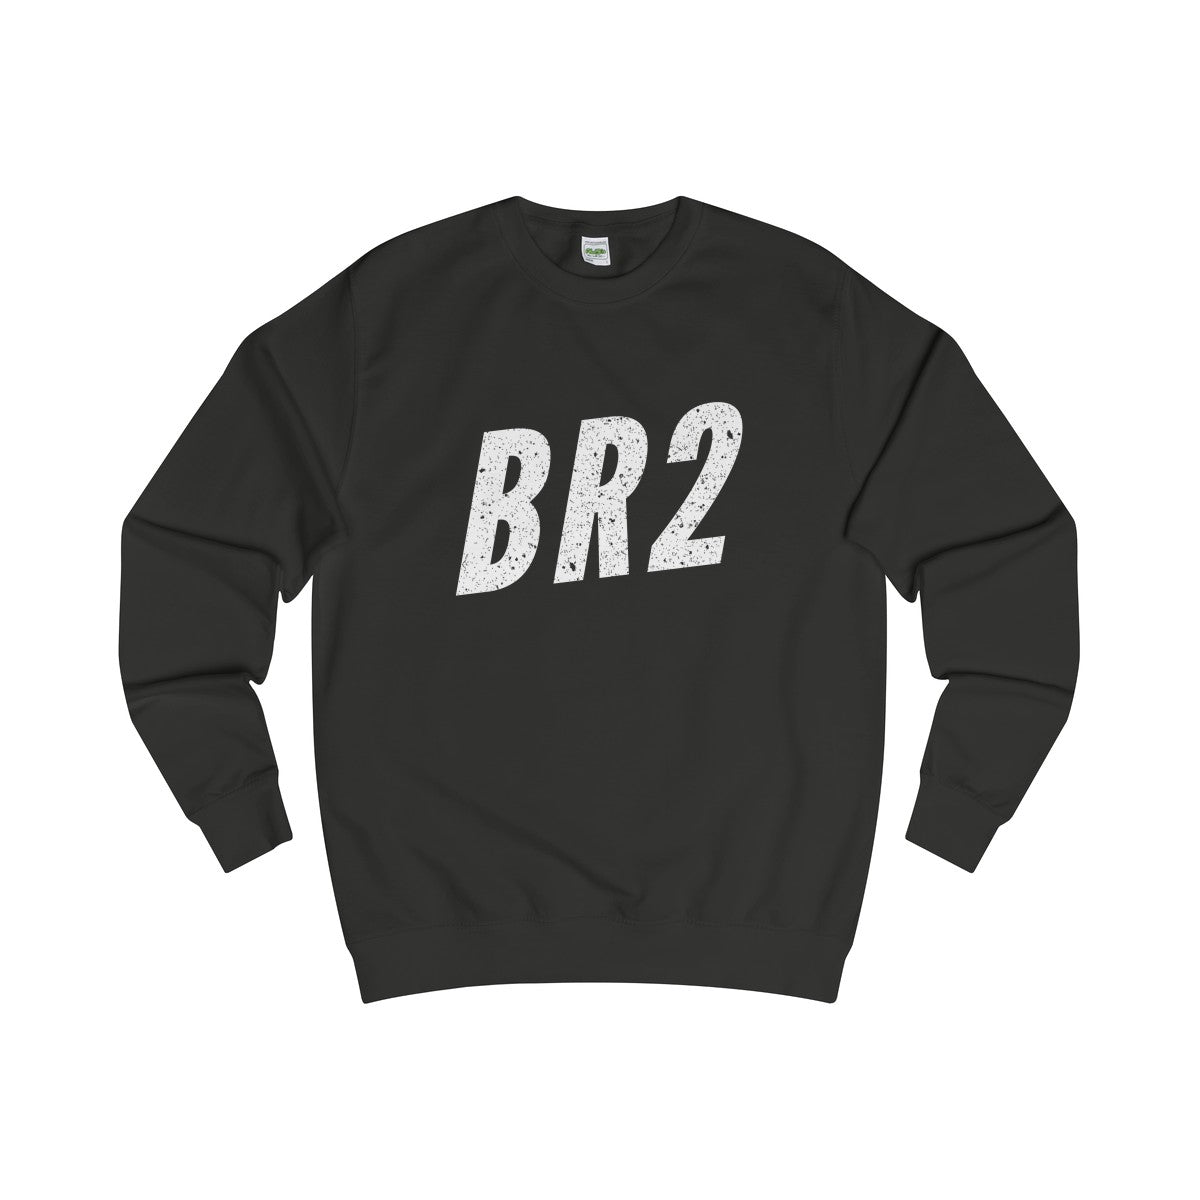 Bromley BR2 Sweater